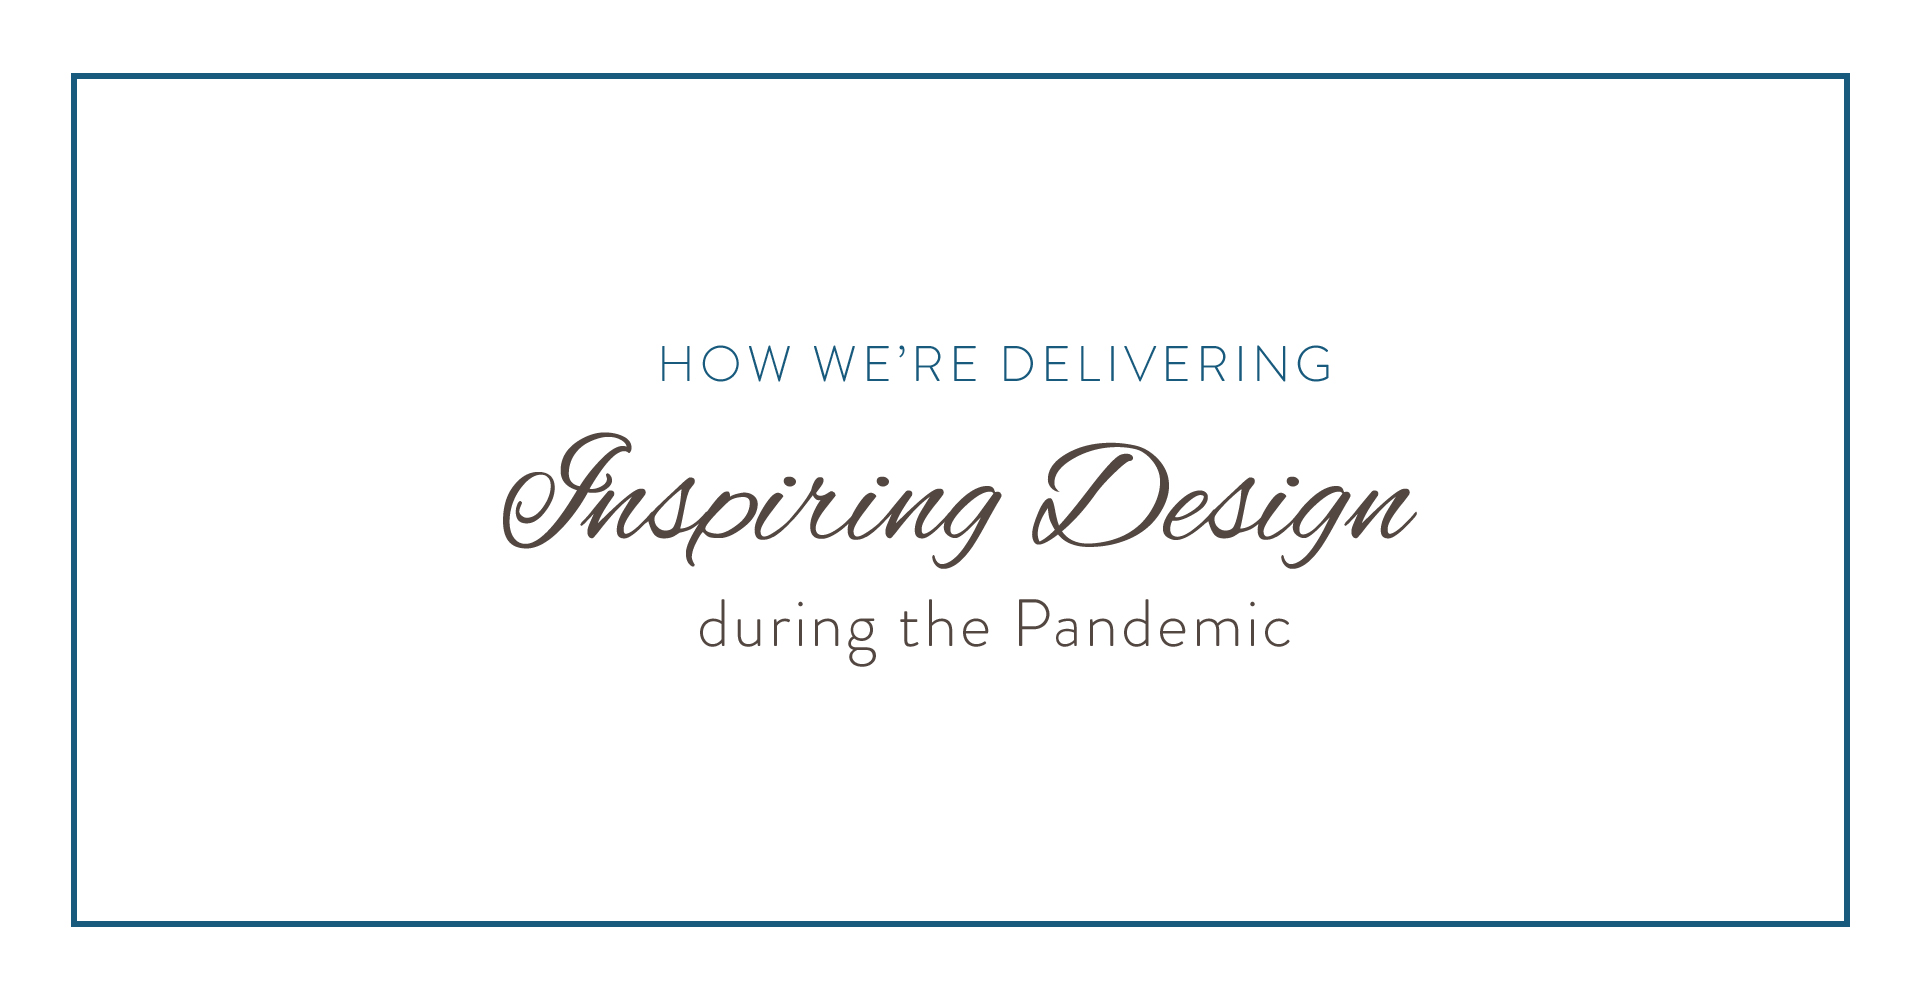 How We're Delivering Inspiring Design during the Pandemic